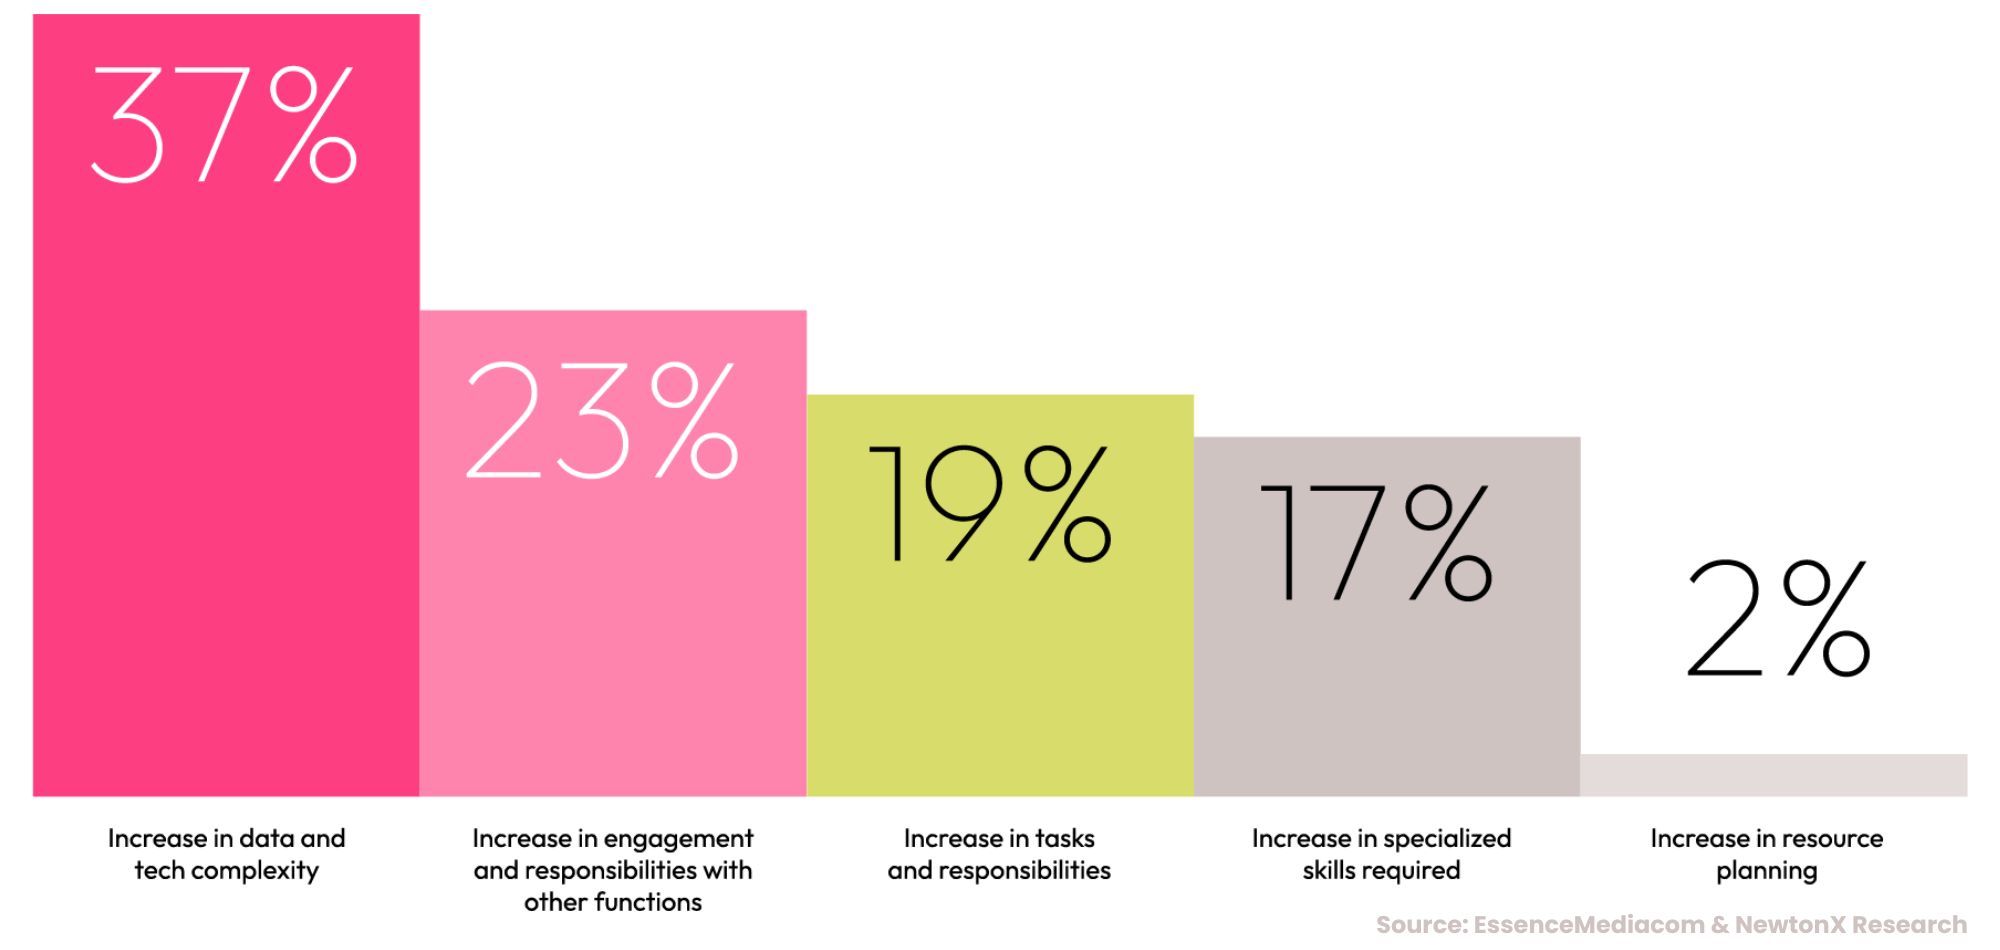 EssenceMediacom B2B CMO Survey - Graph outlining causes of the increase in complexity within senior marketing roles